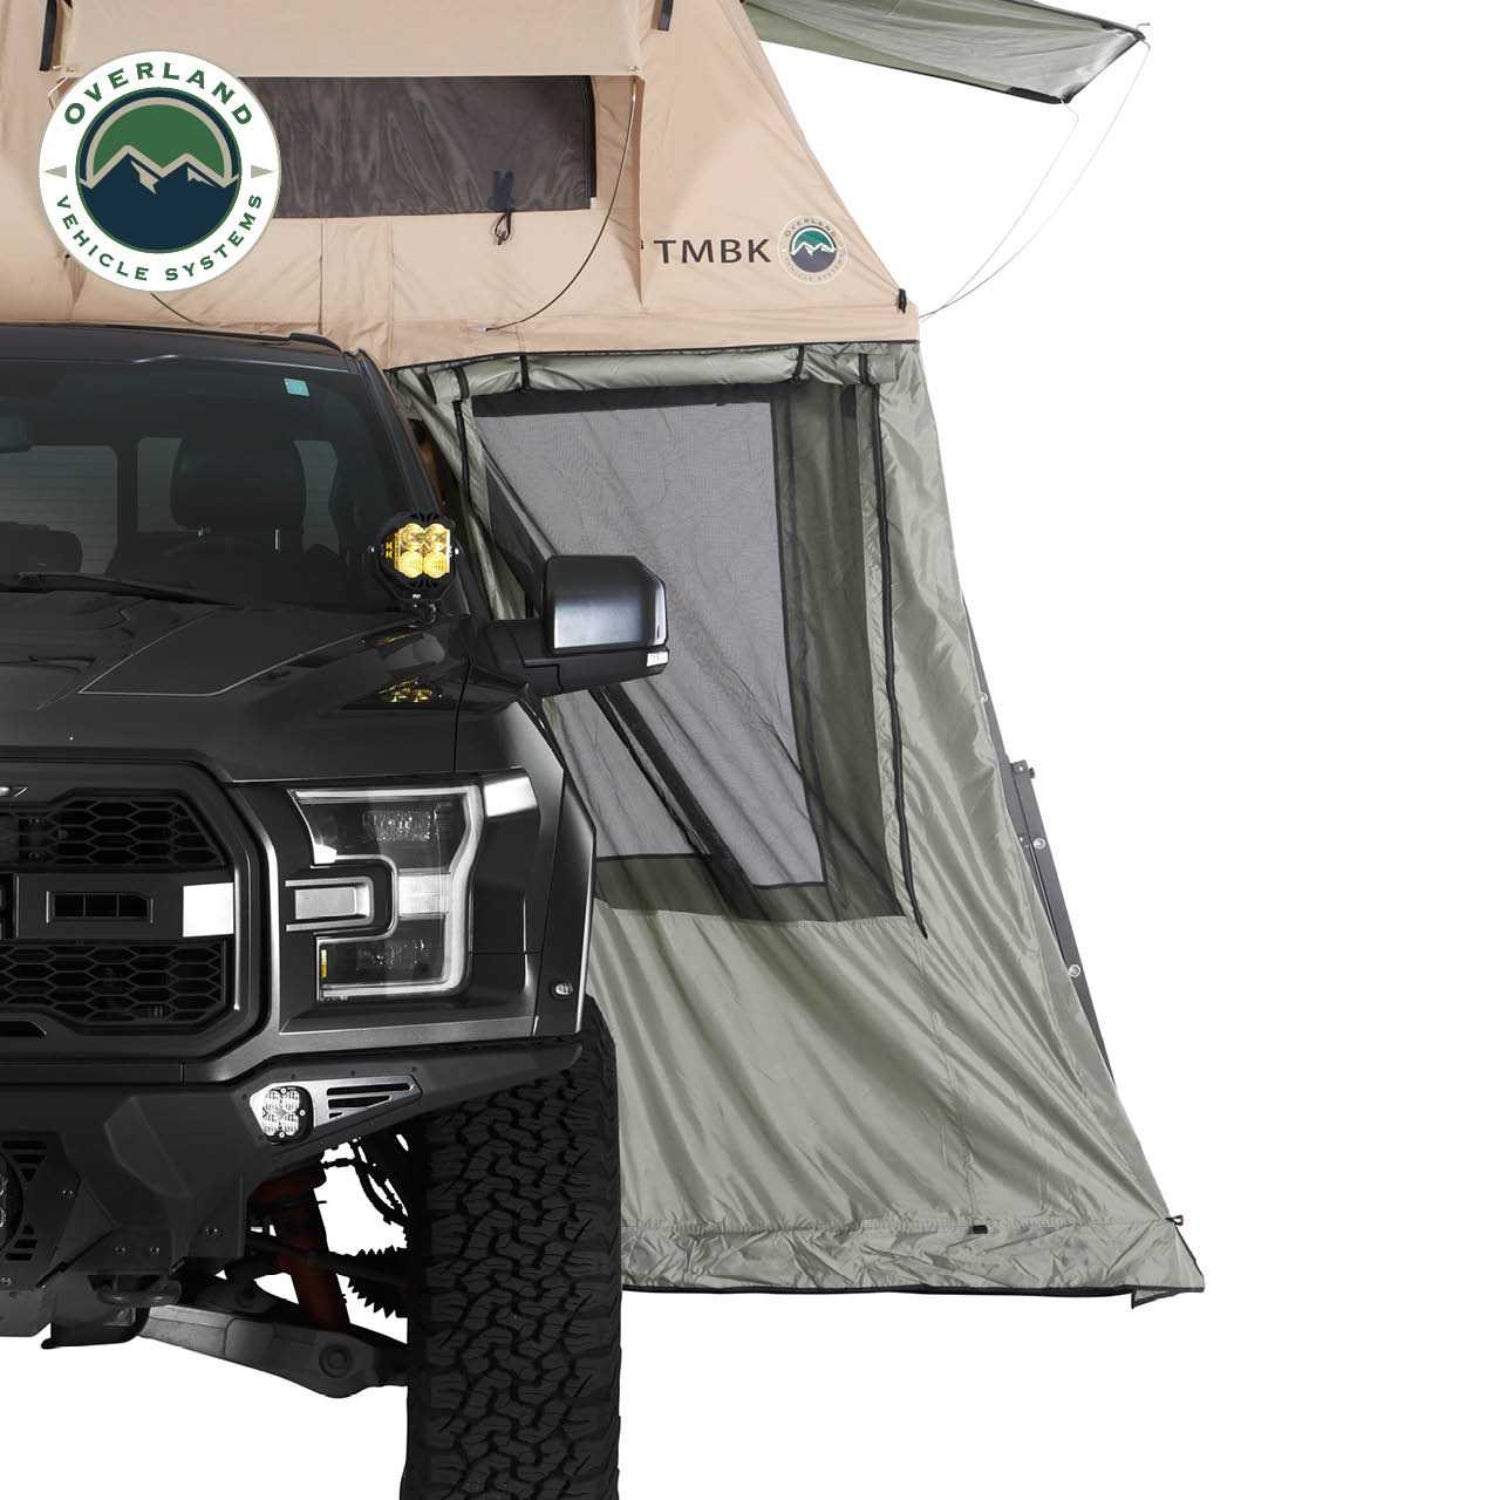 Overland Vehicle Systems Tmbk Roof Top Tent Annex Green Base With Black Floor Side view